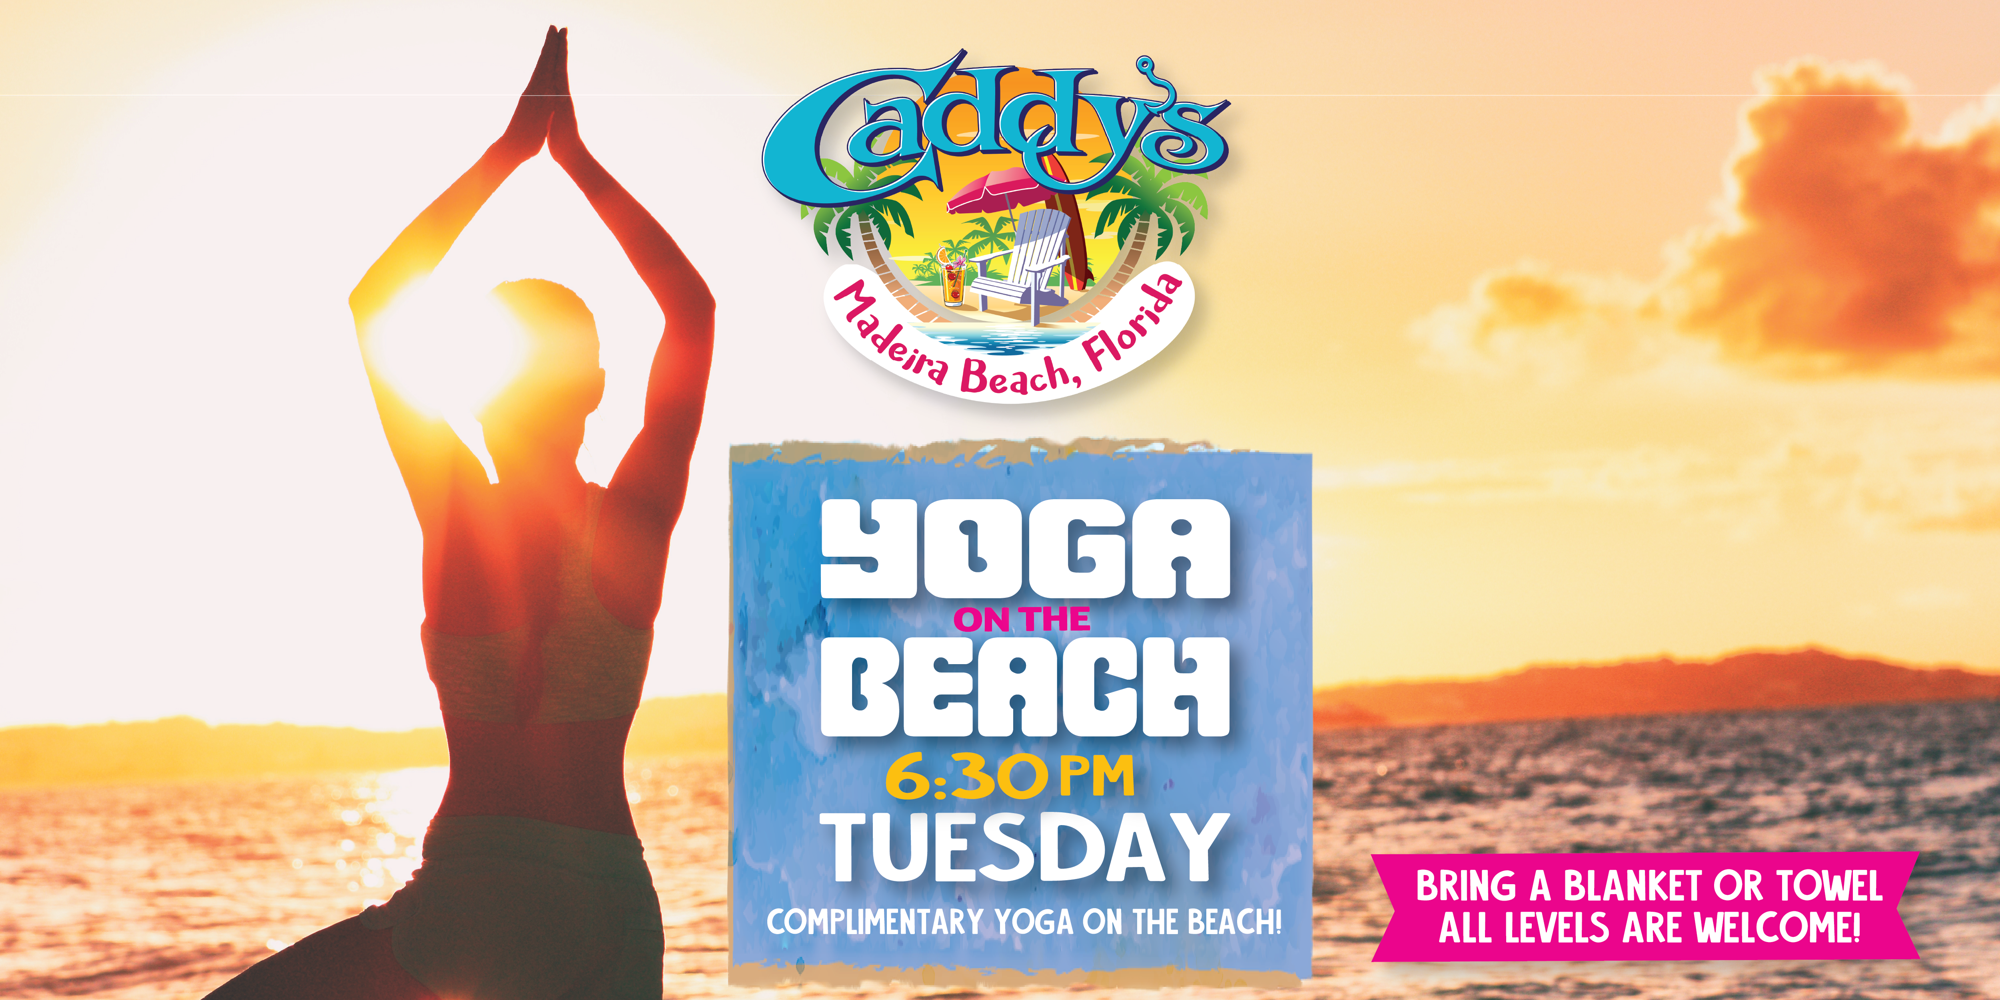 Tuesday Yoga on the Beach promotional image